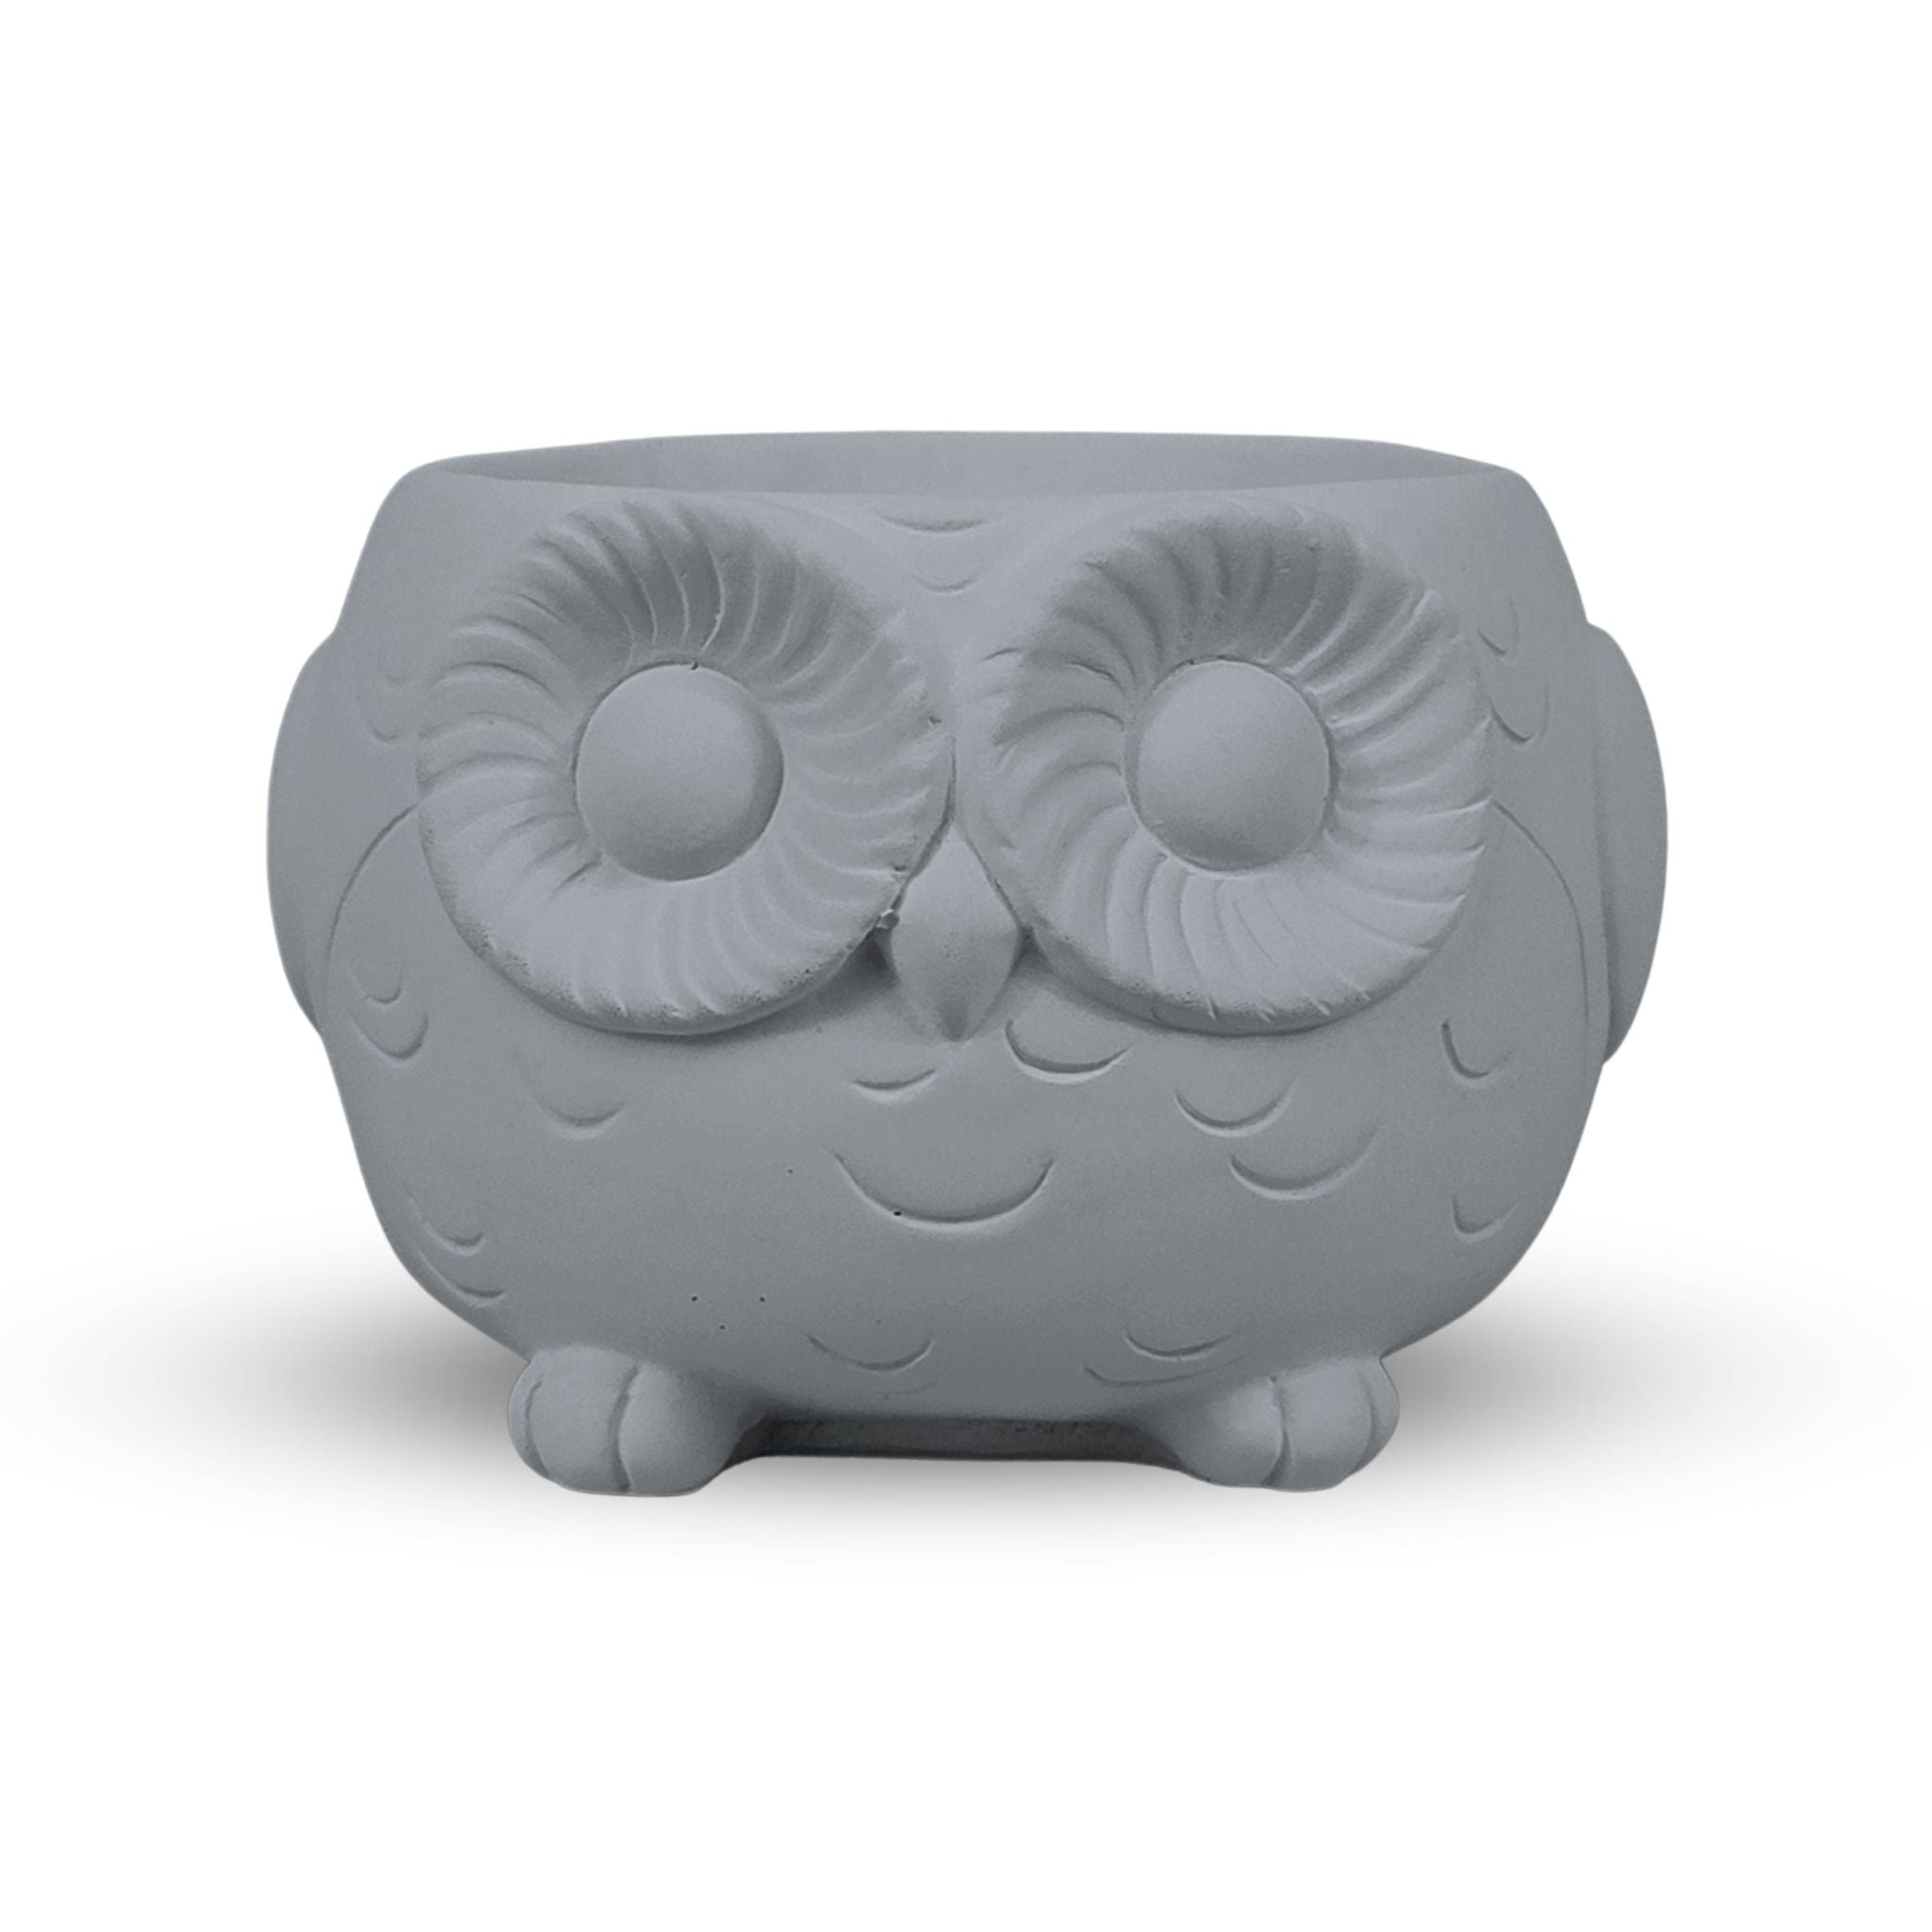 Wise Wings Owl Planter - Gray